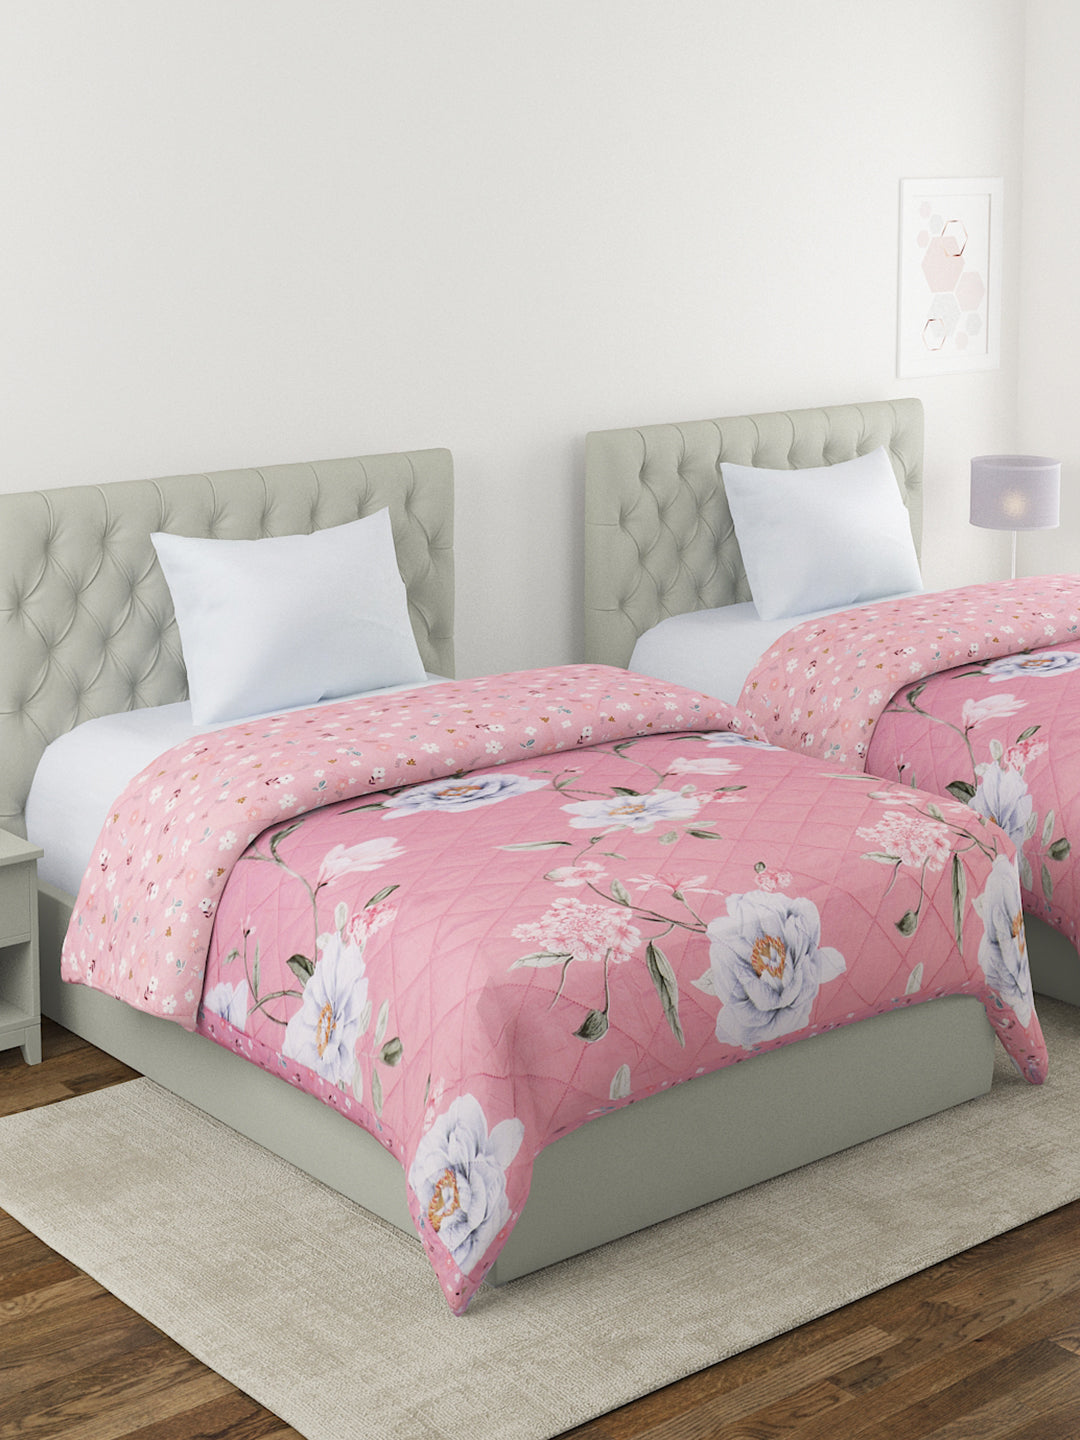 Floral Print Set of 2 Single Bed Light Weight Comforter-Pink